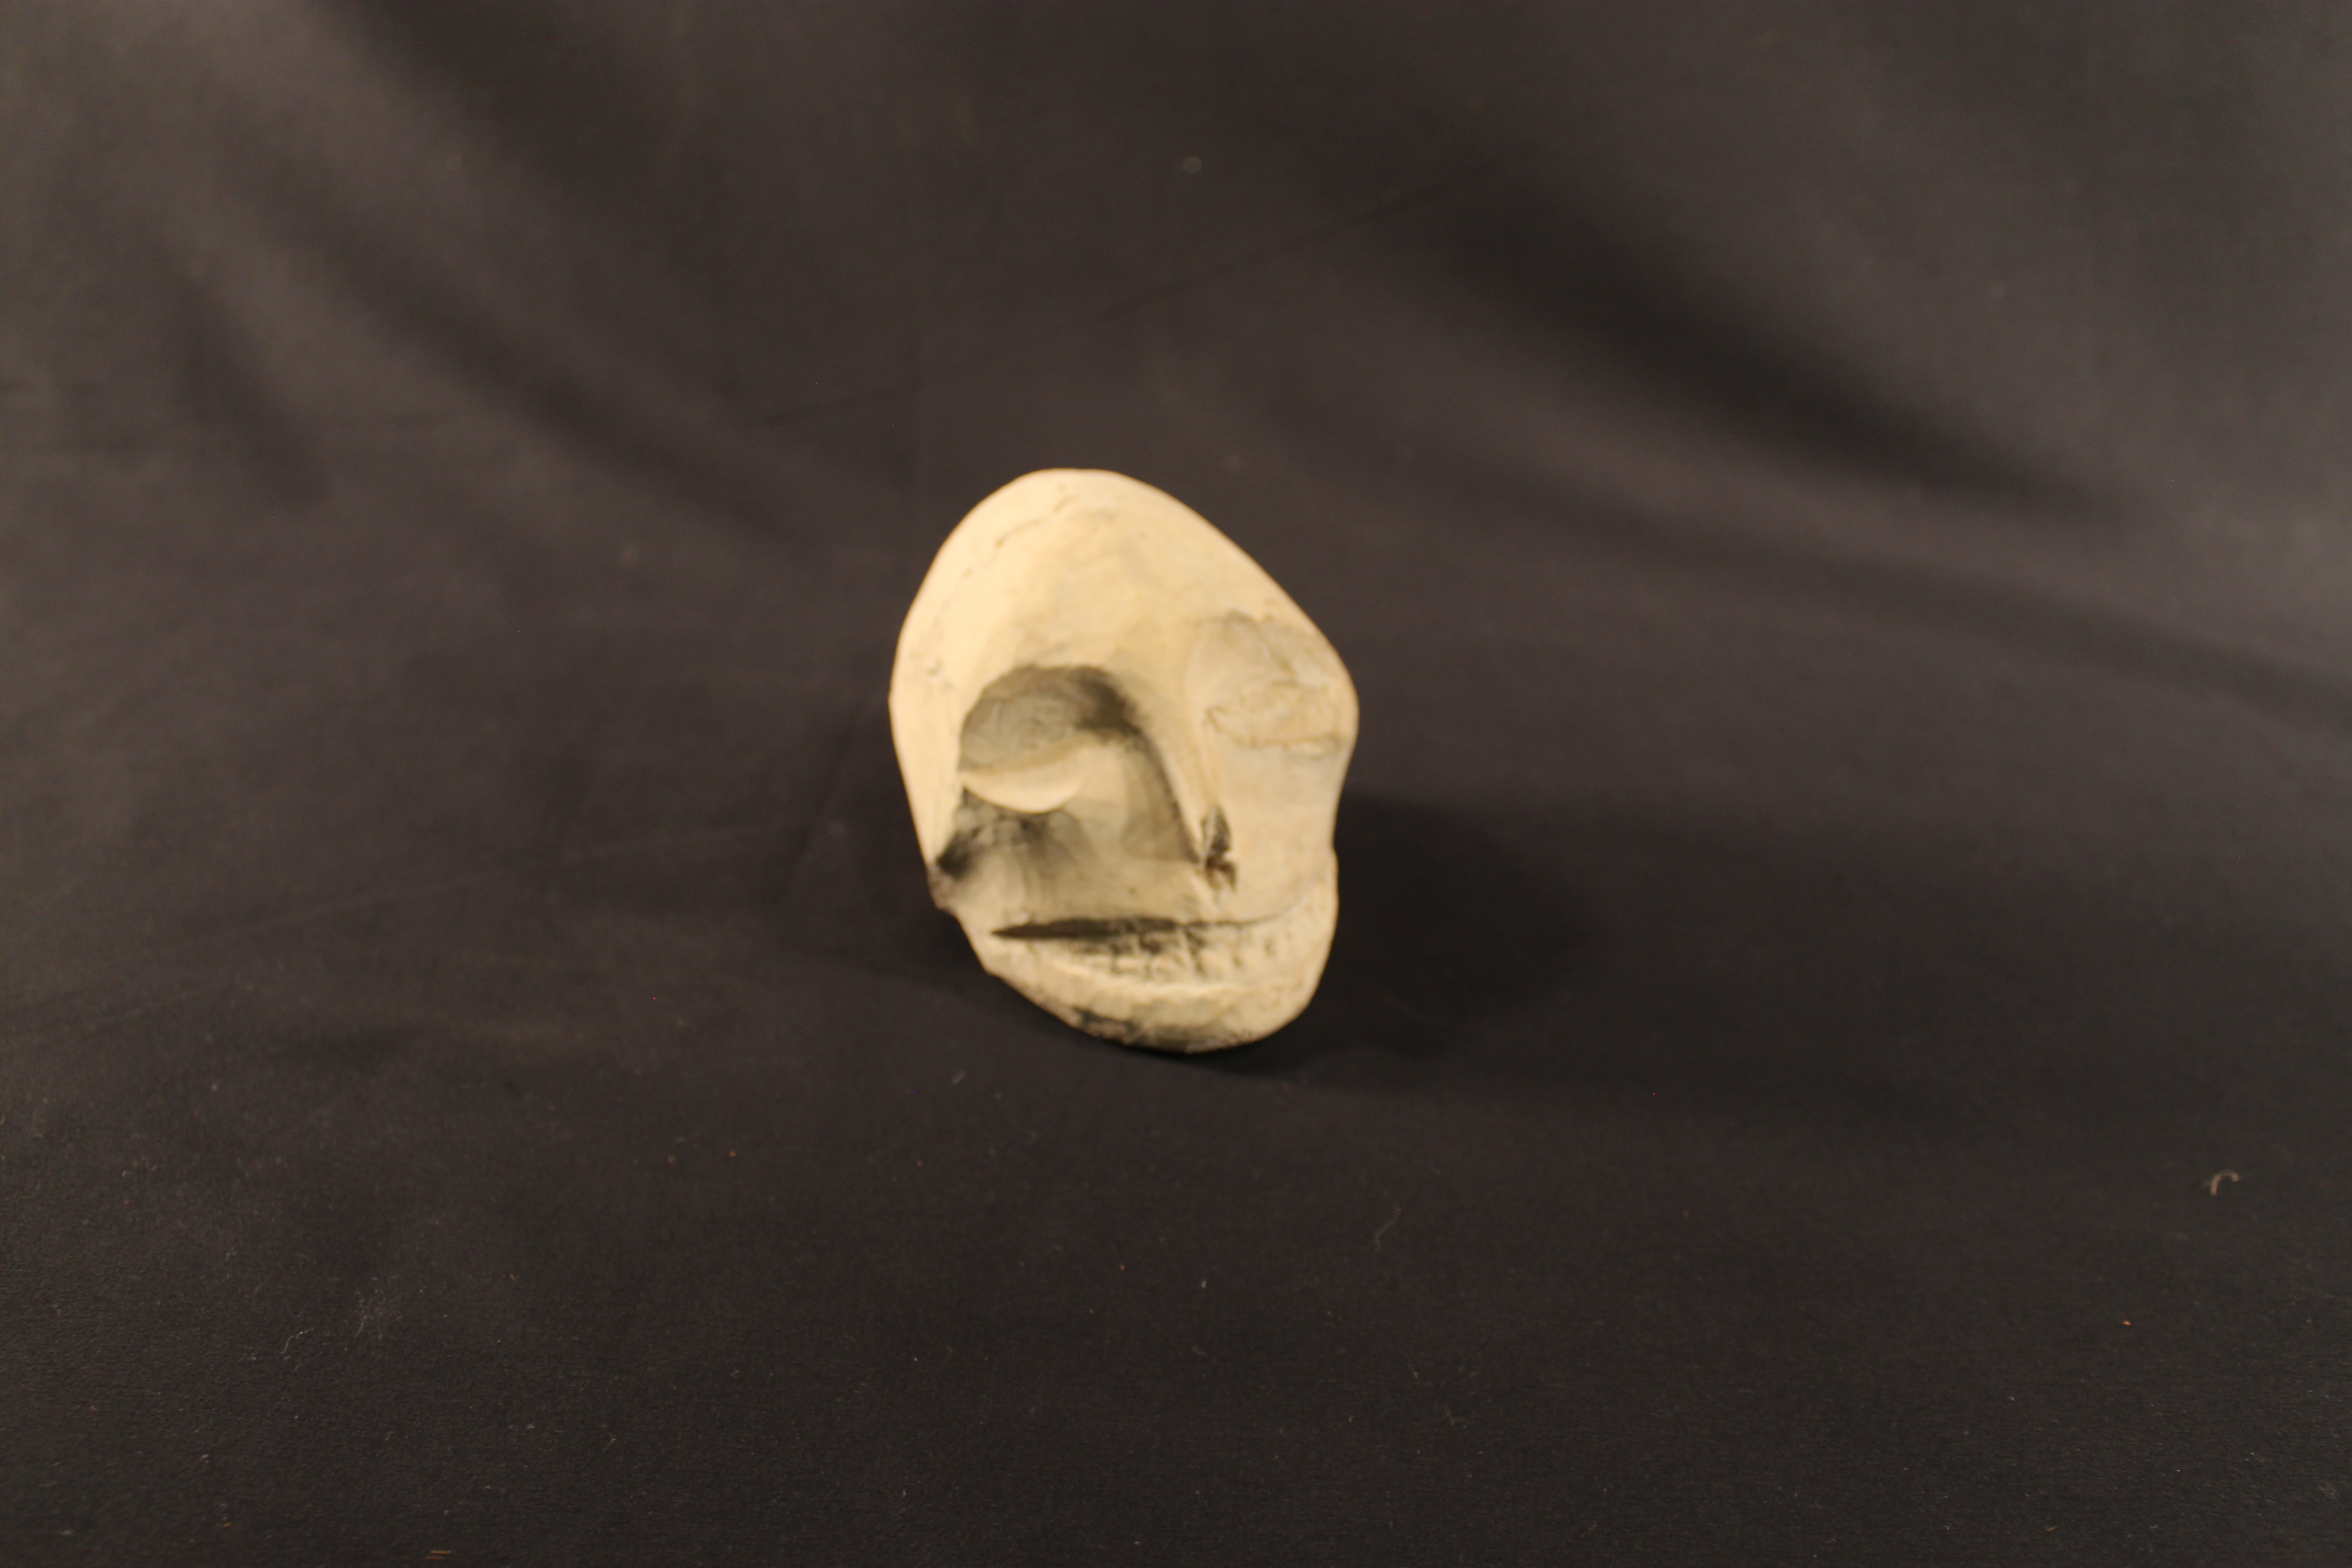 Wooden carving of a human skull